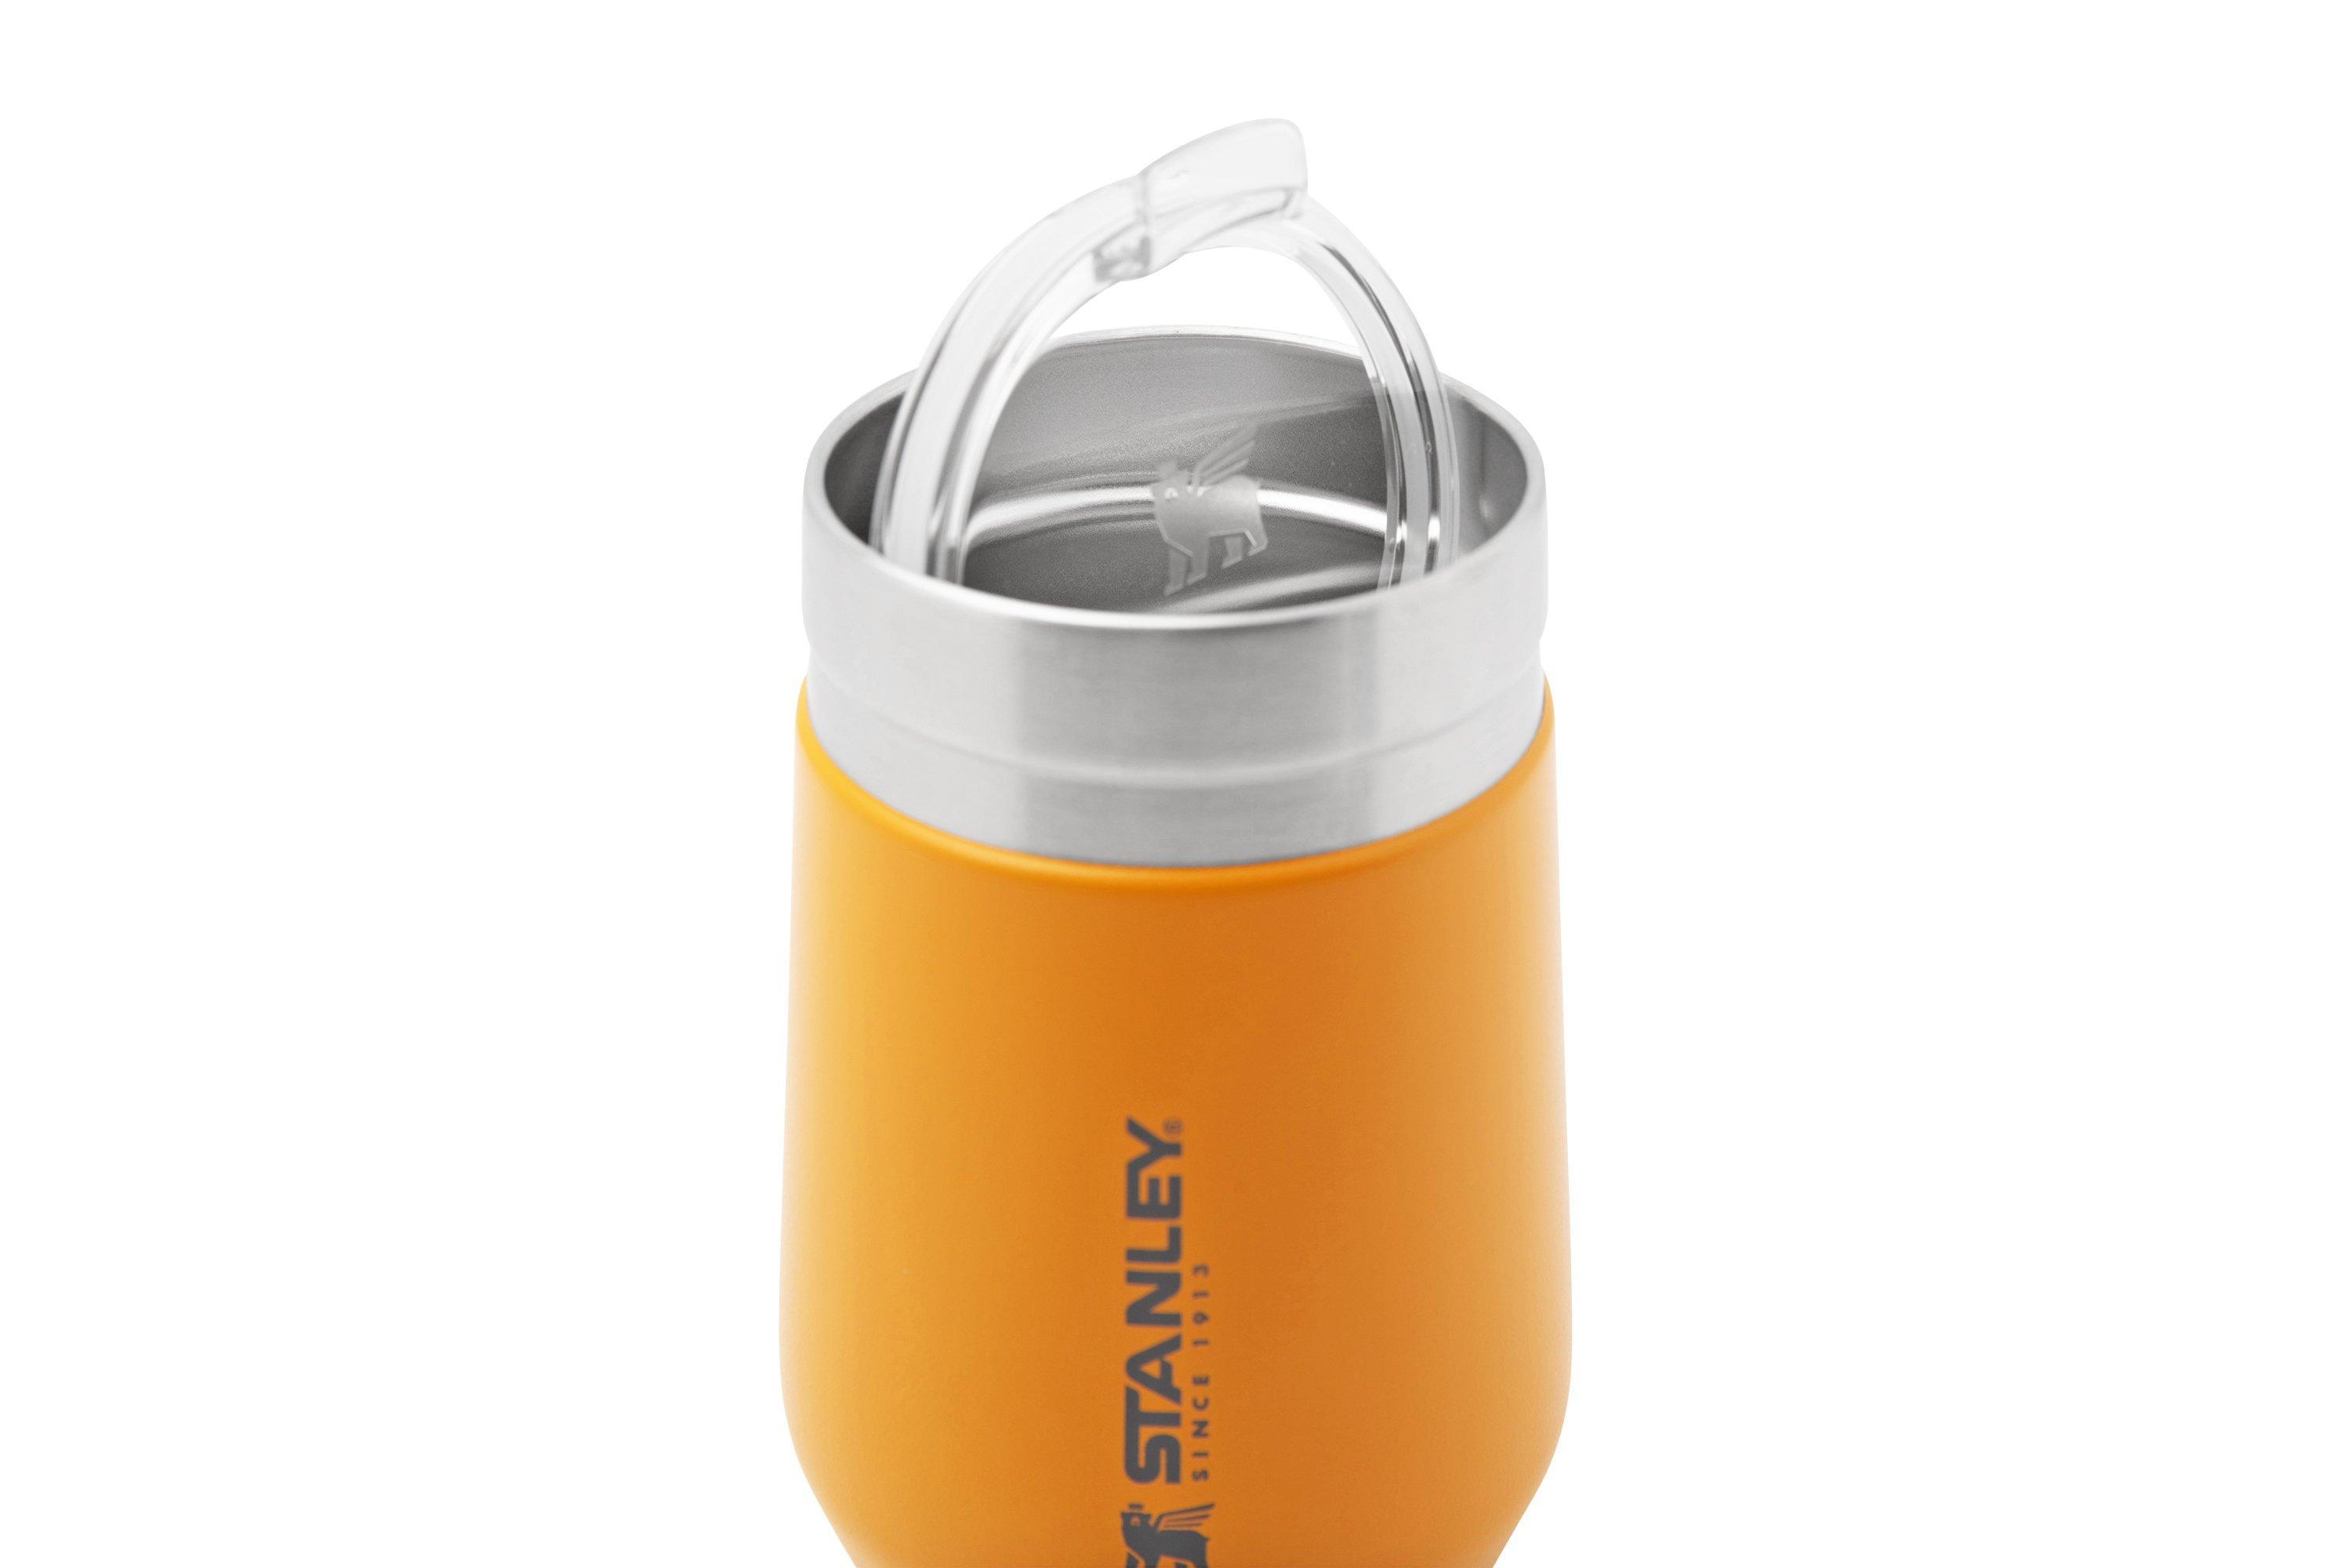 This No. 1 bestselling Stanley tumbler is on sale at